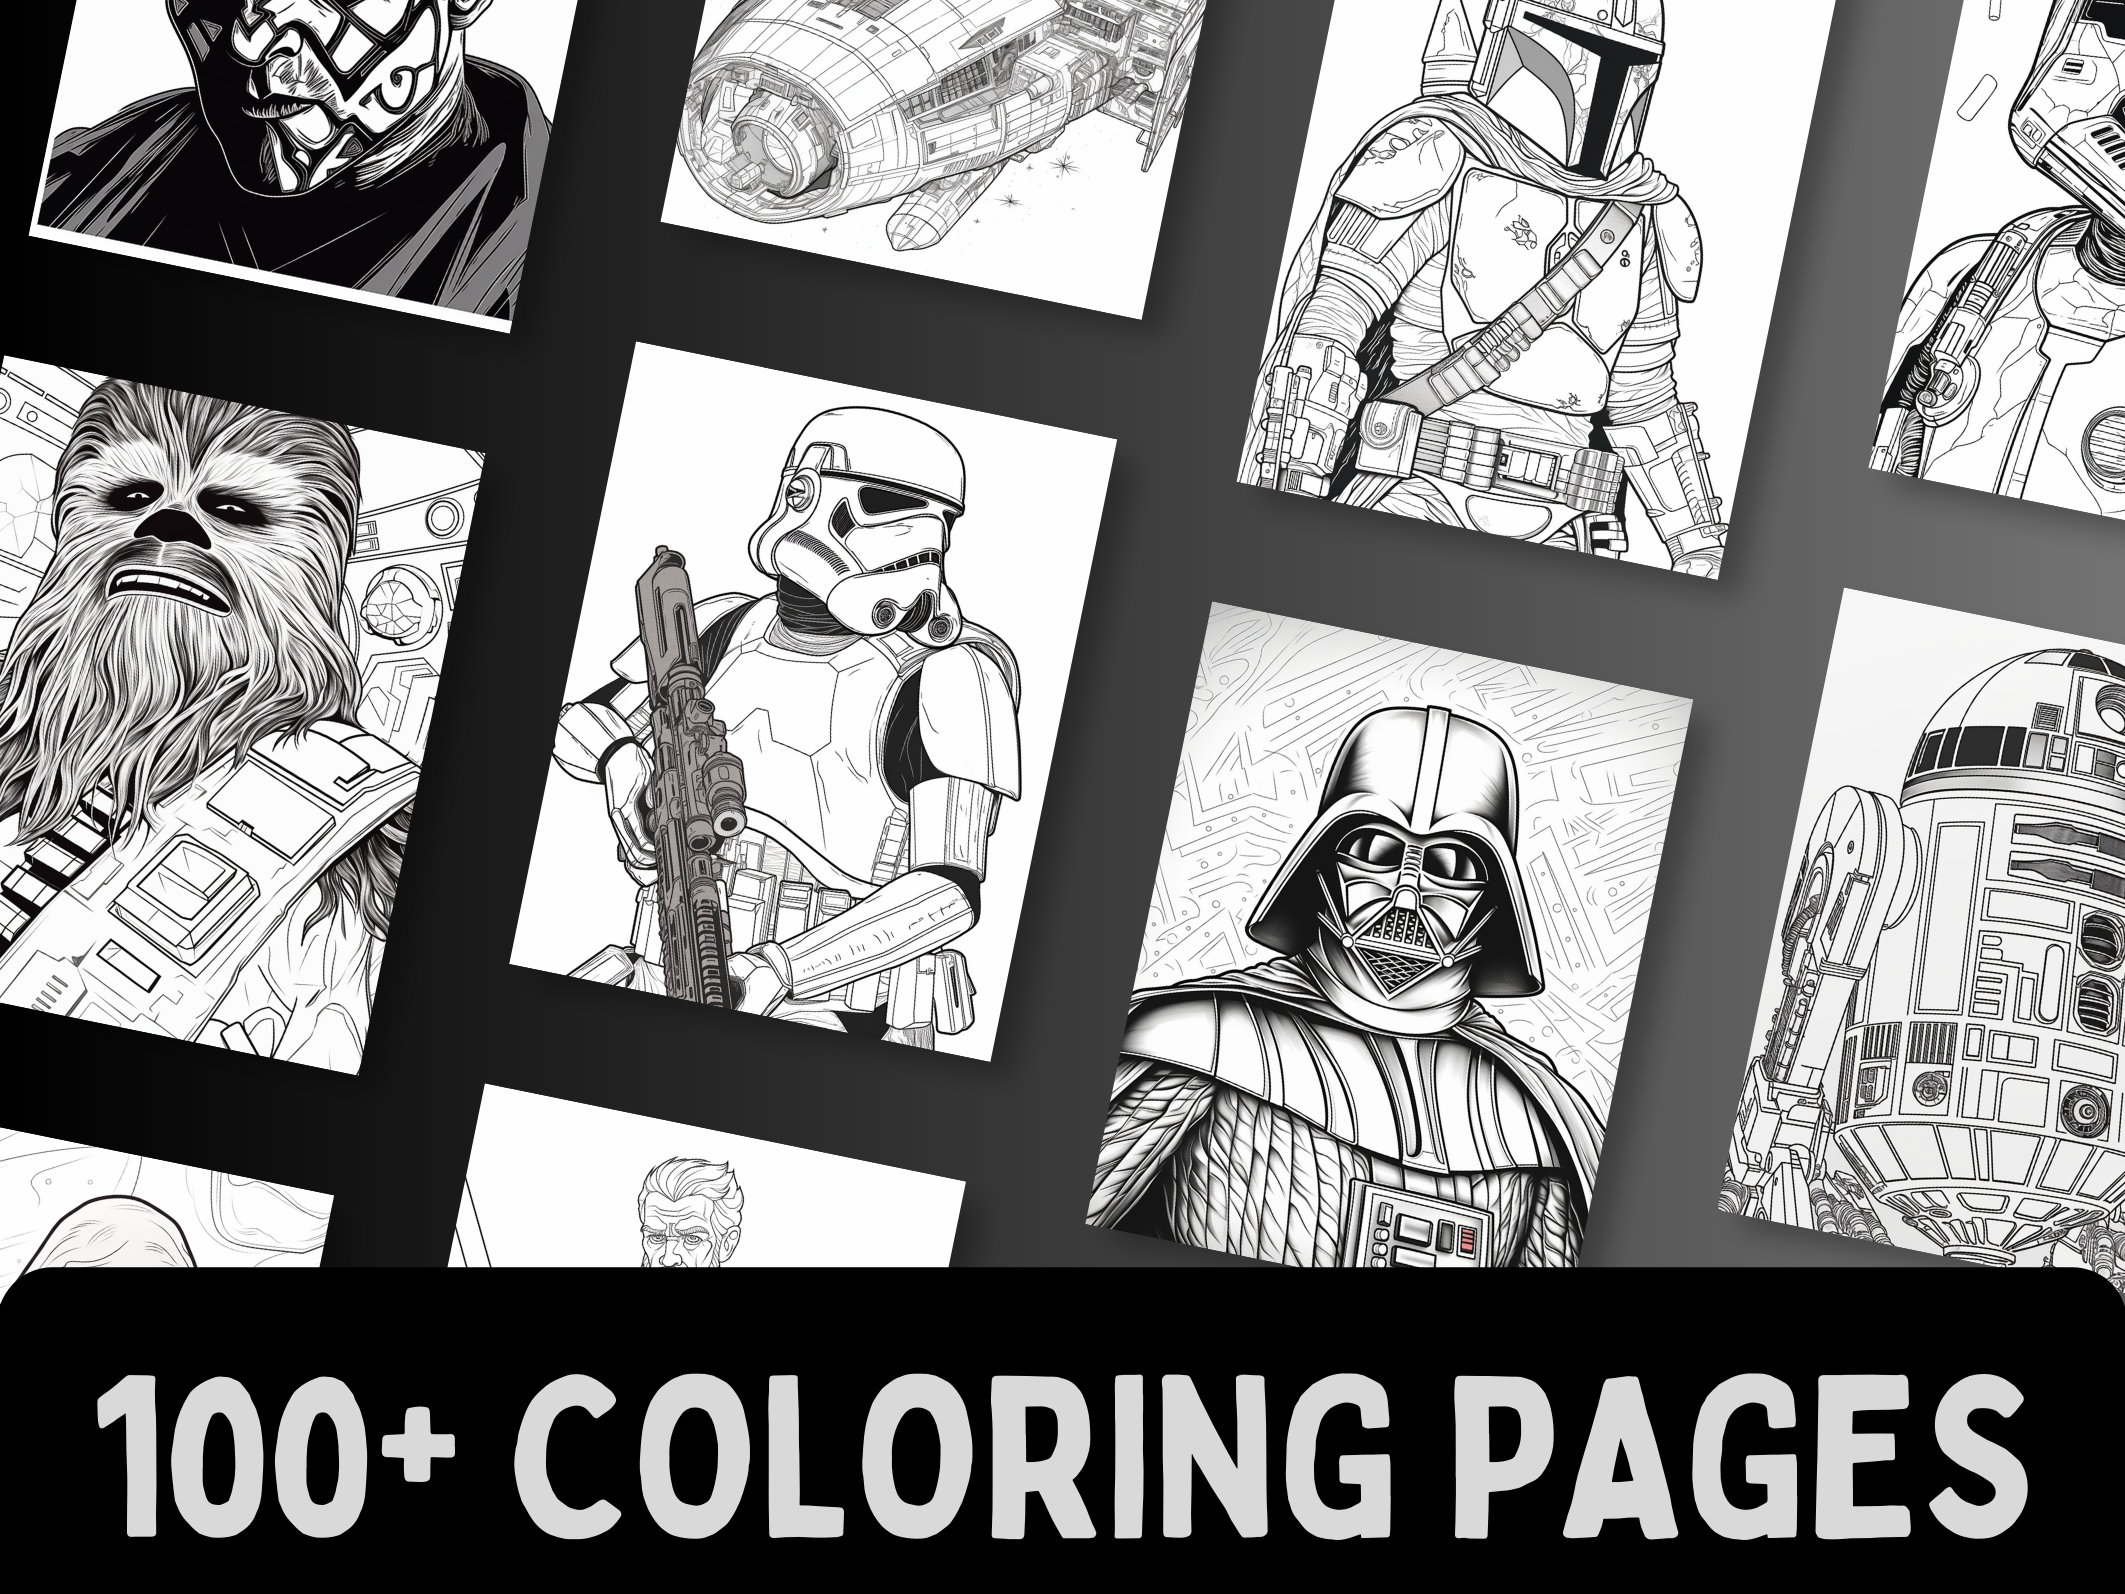 Star wars coloring pages star wars coloring book darth vader printable pdf pages kids coloring pages instant download